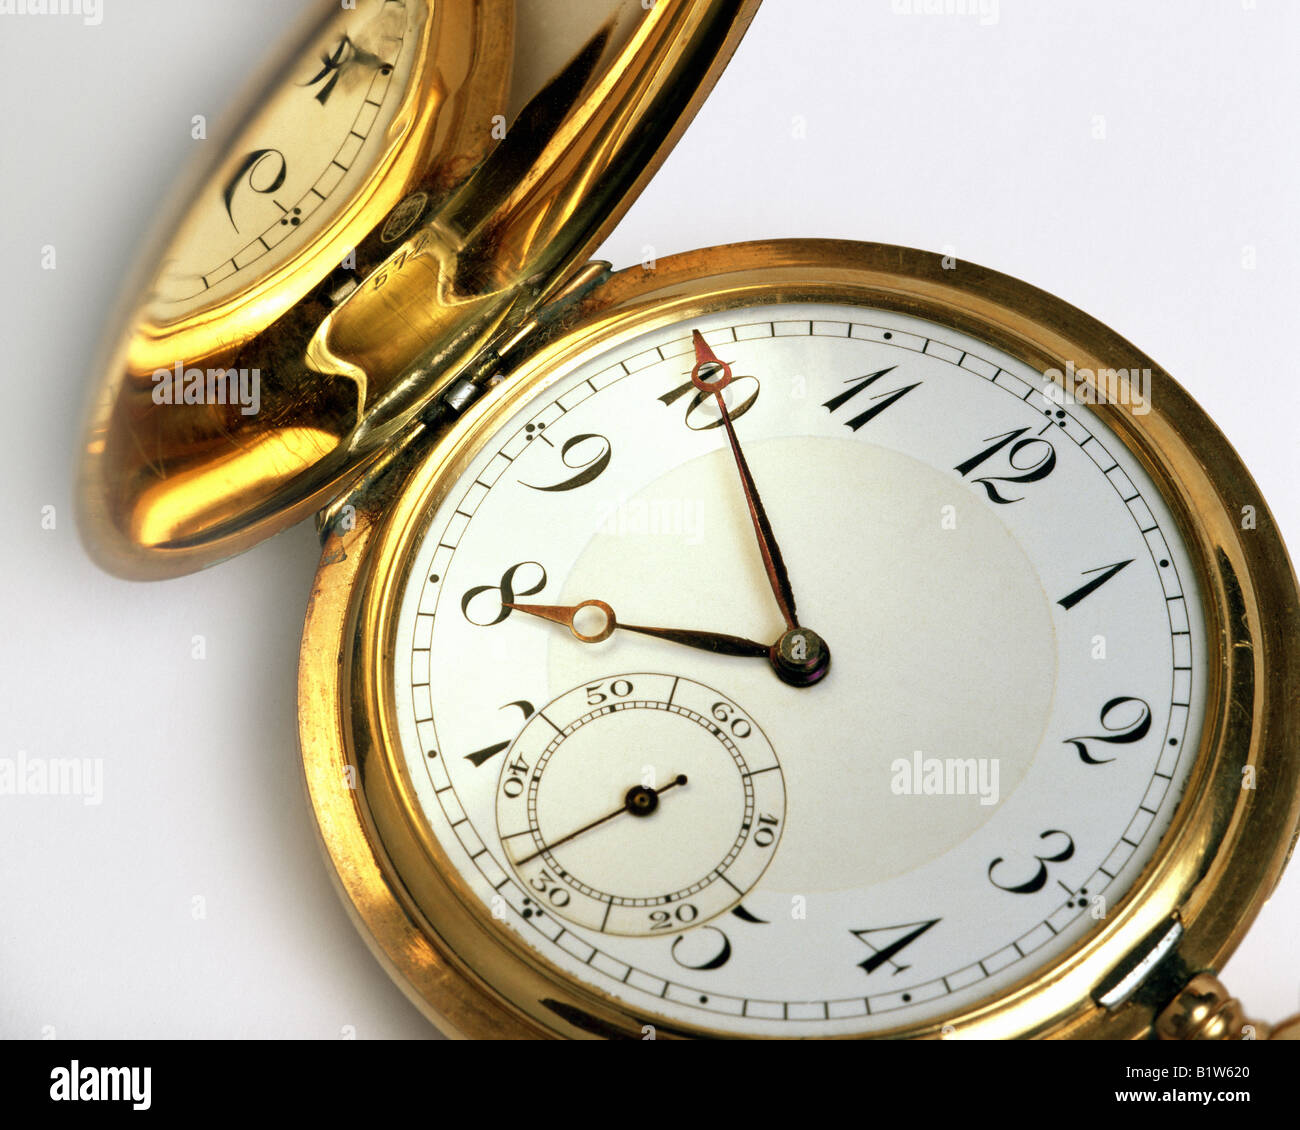 TIME CONCEPT: Golden Pocket Watch Stock Photo